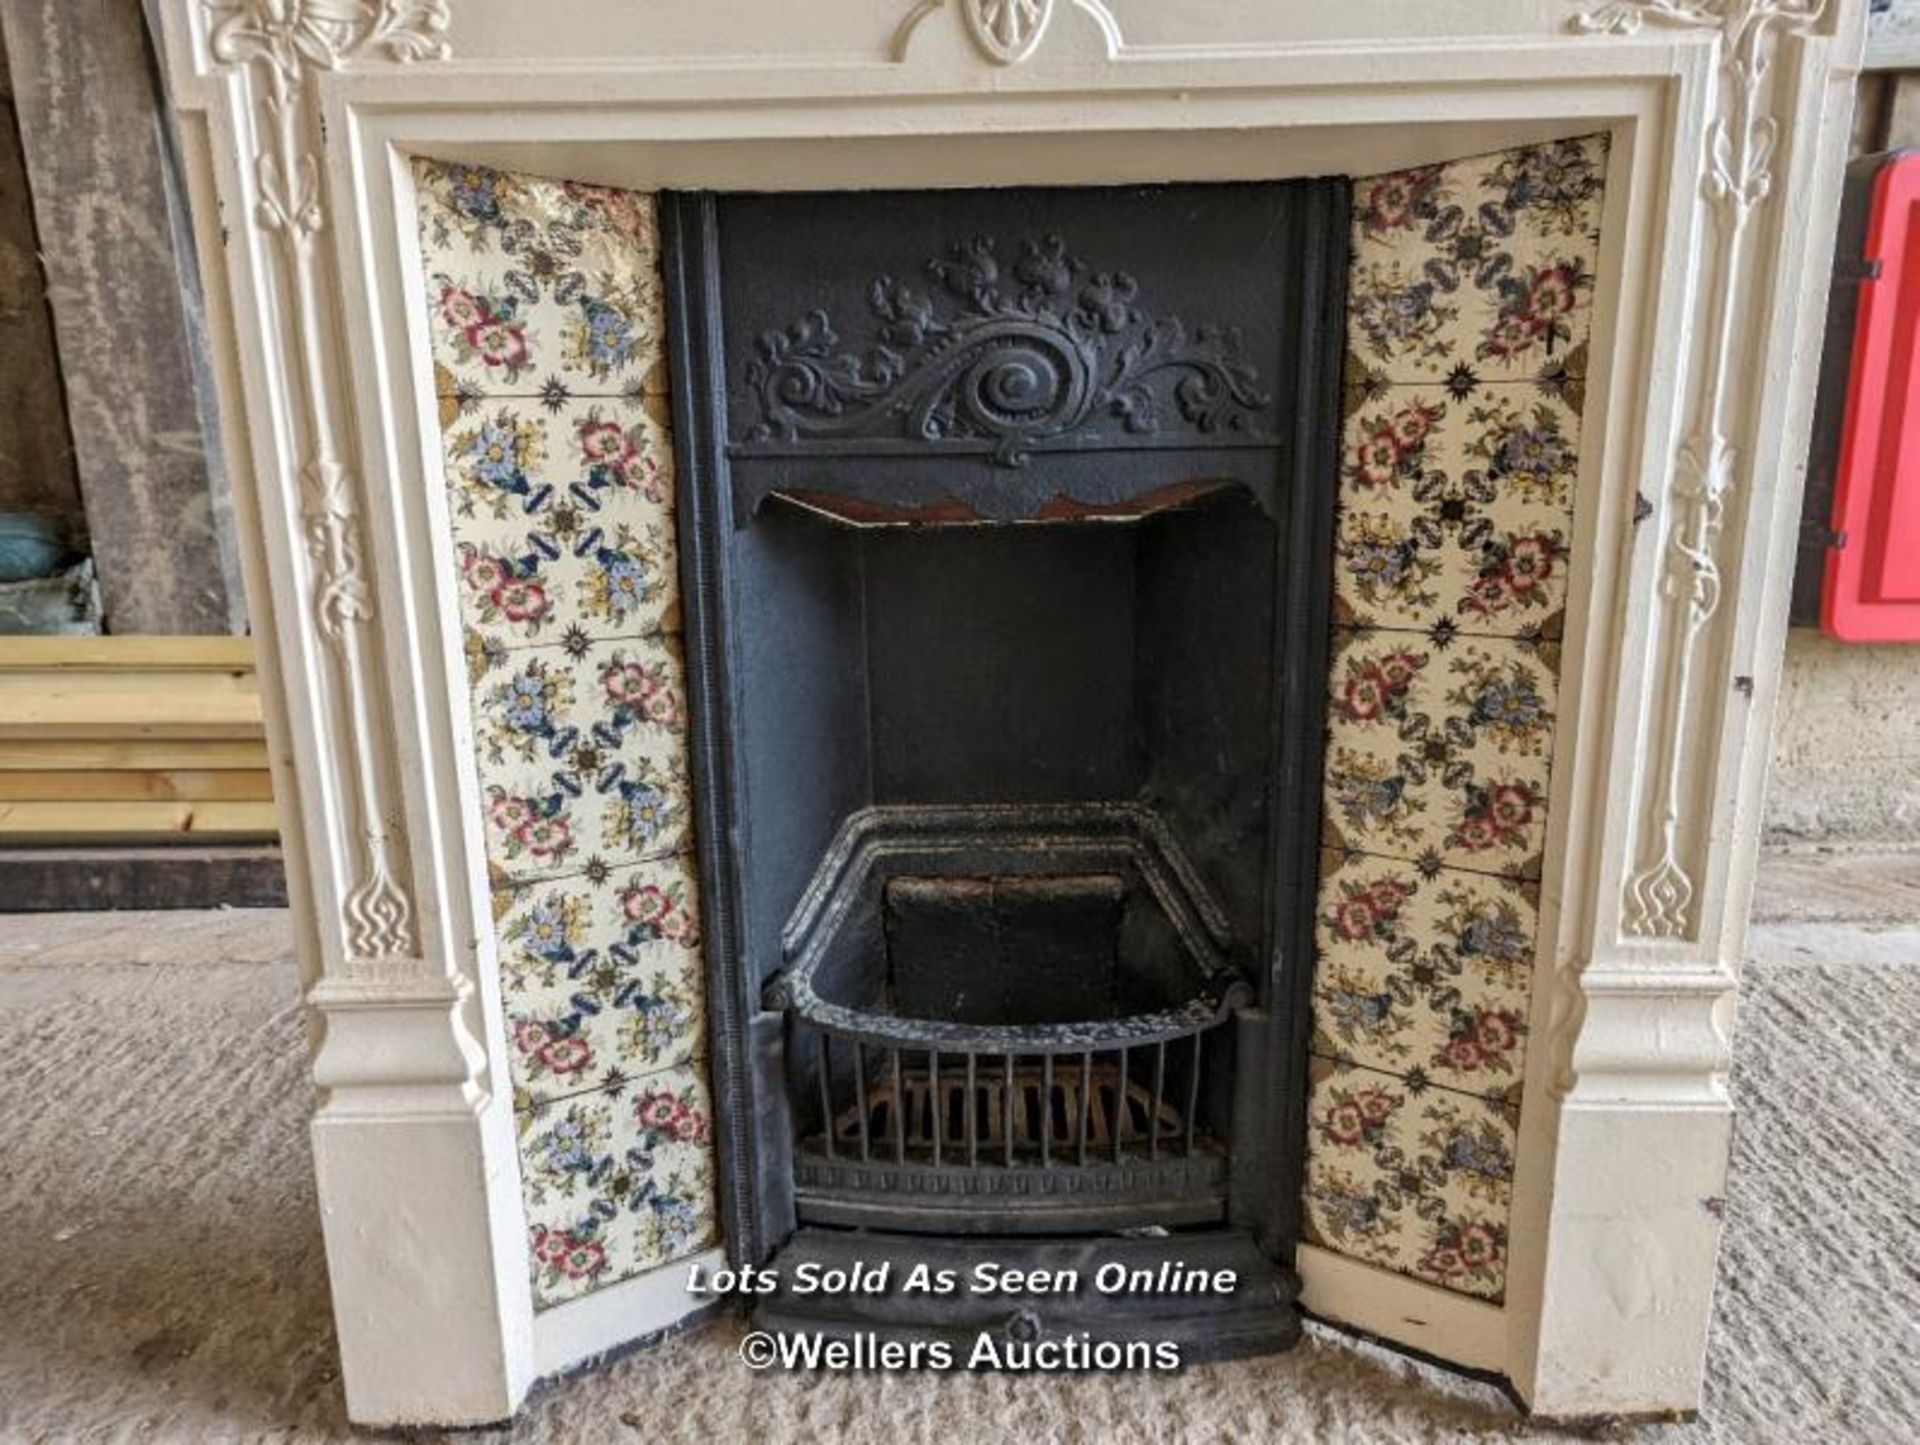 Edwardian painted cast iron combination fireplace with tiles. Complete except for one lug missing. - Image 2 of 6